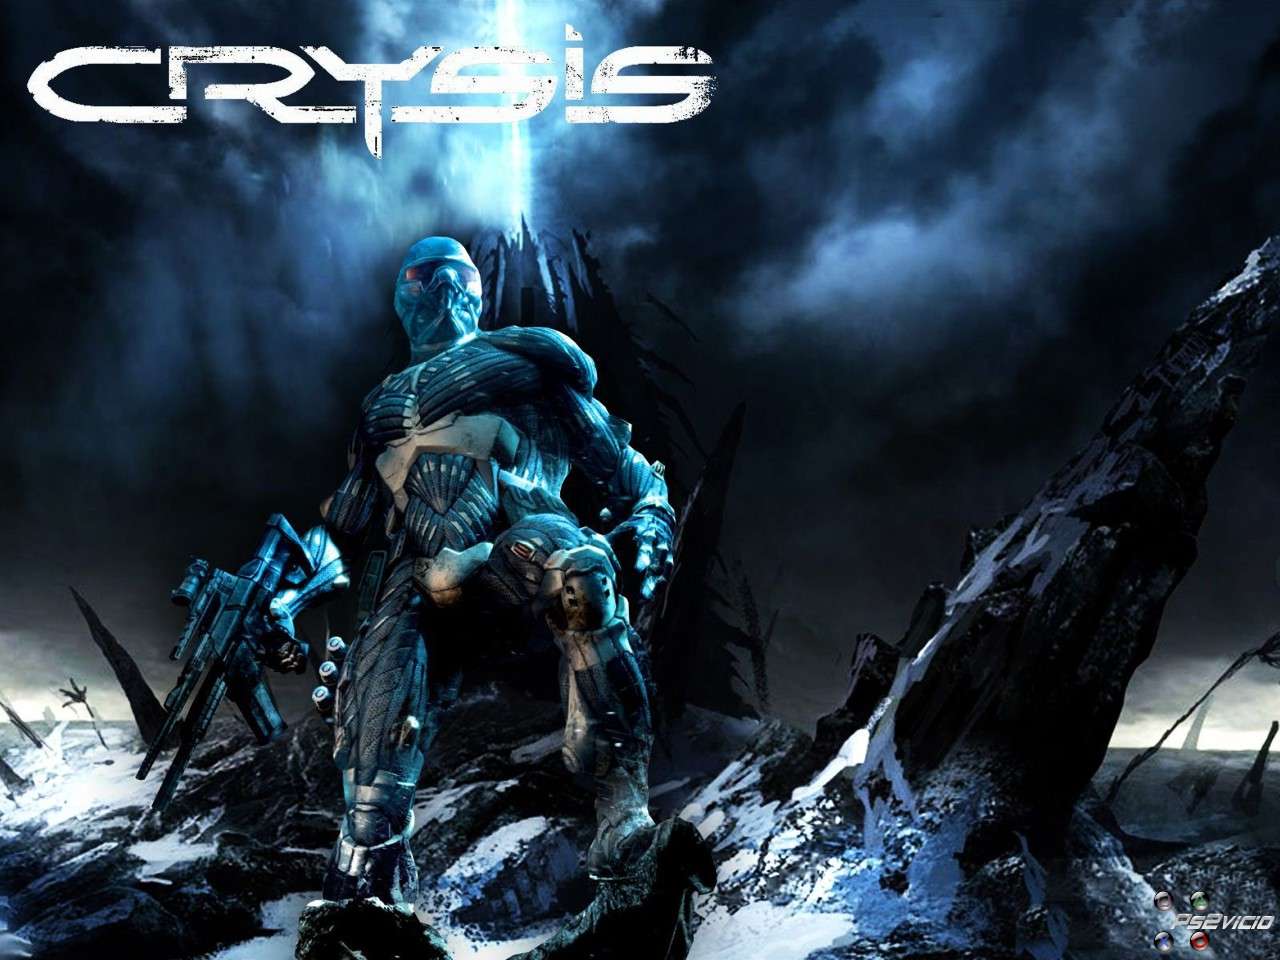 Delta Force Crysis Wallpaper. New Game Crysis Wallpaper